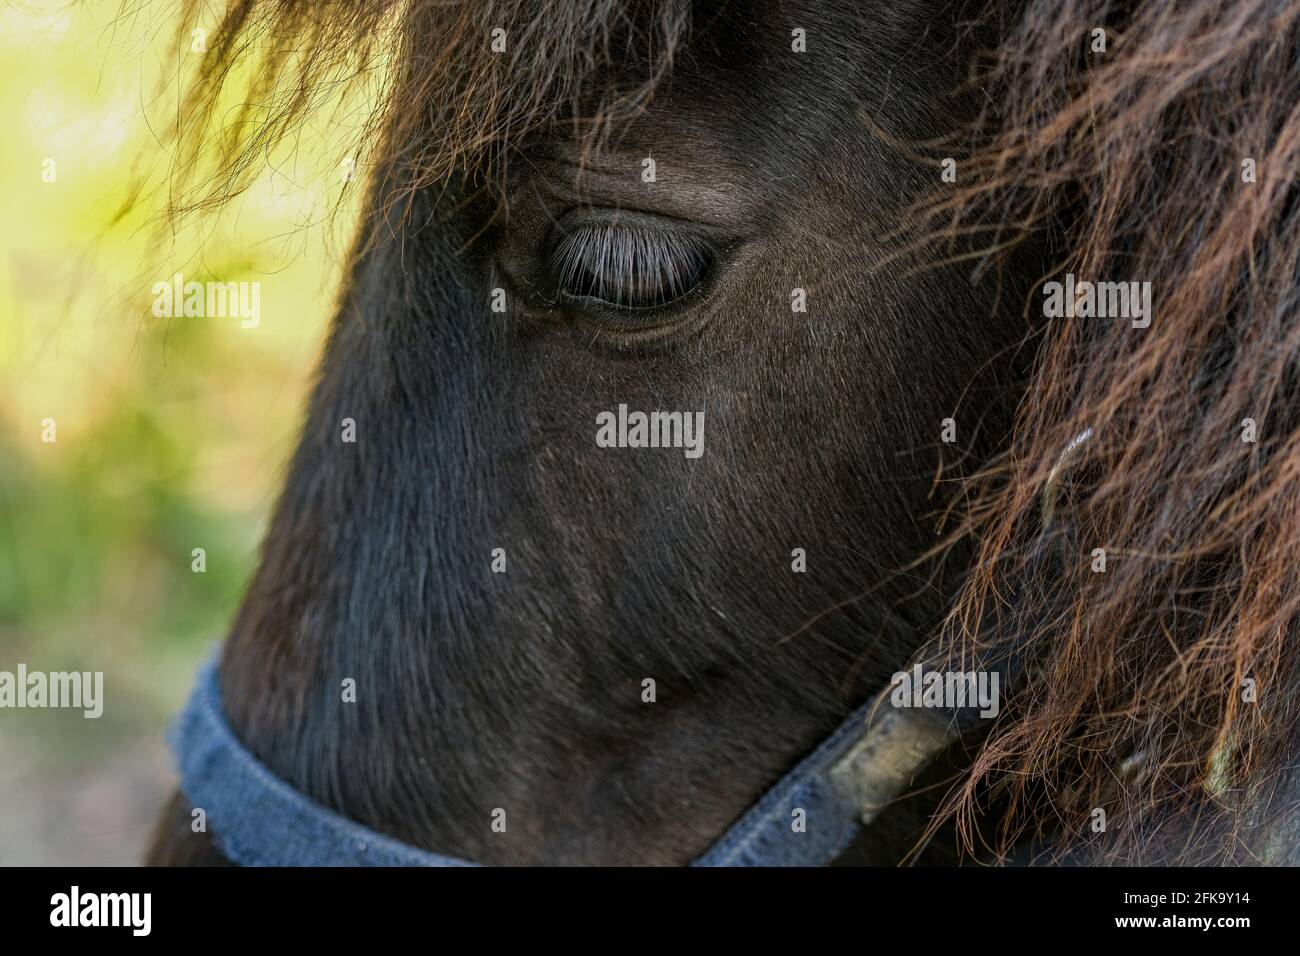 Close up view of horse animal eye while grazing in rural area,domestic animal breed Stock Photo